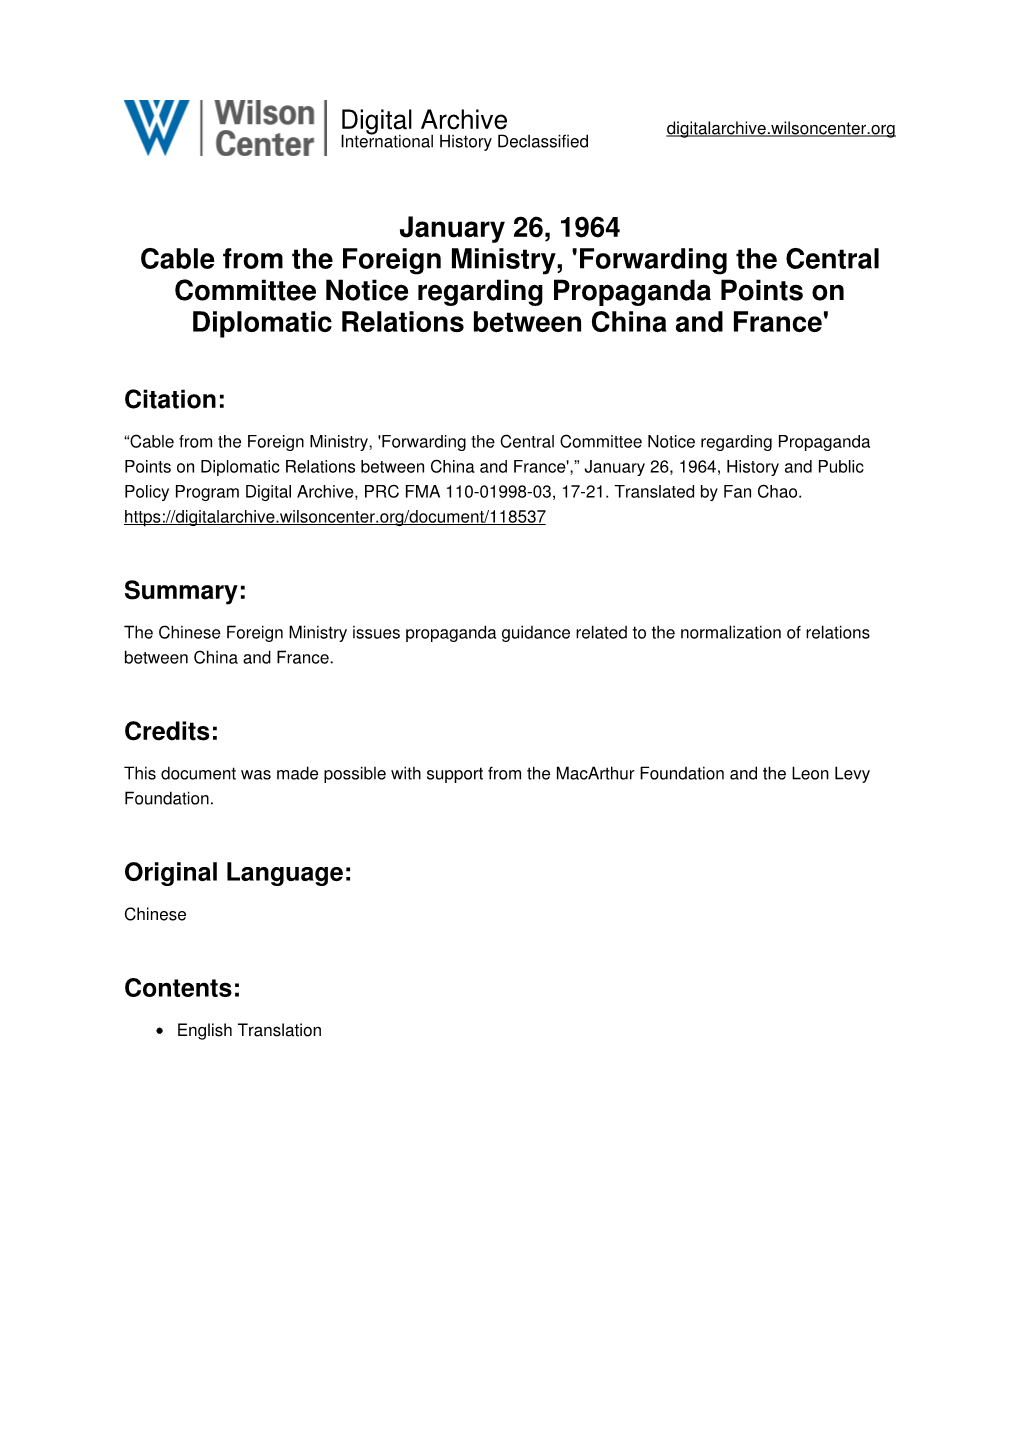 January 26, 1964 Cable from the Foreign Ministry, 'Forwarding The